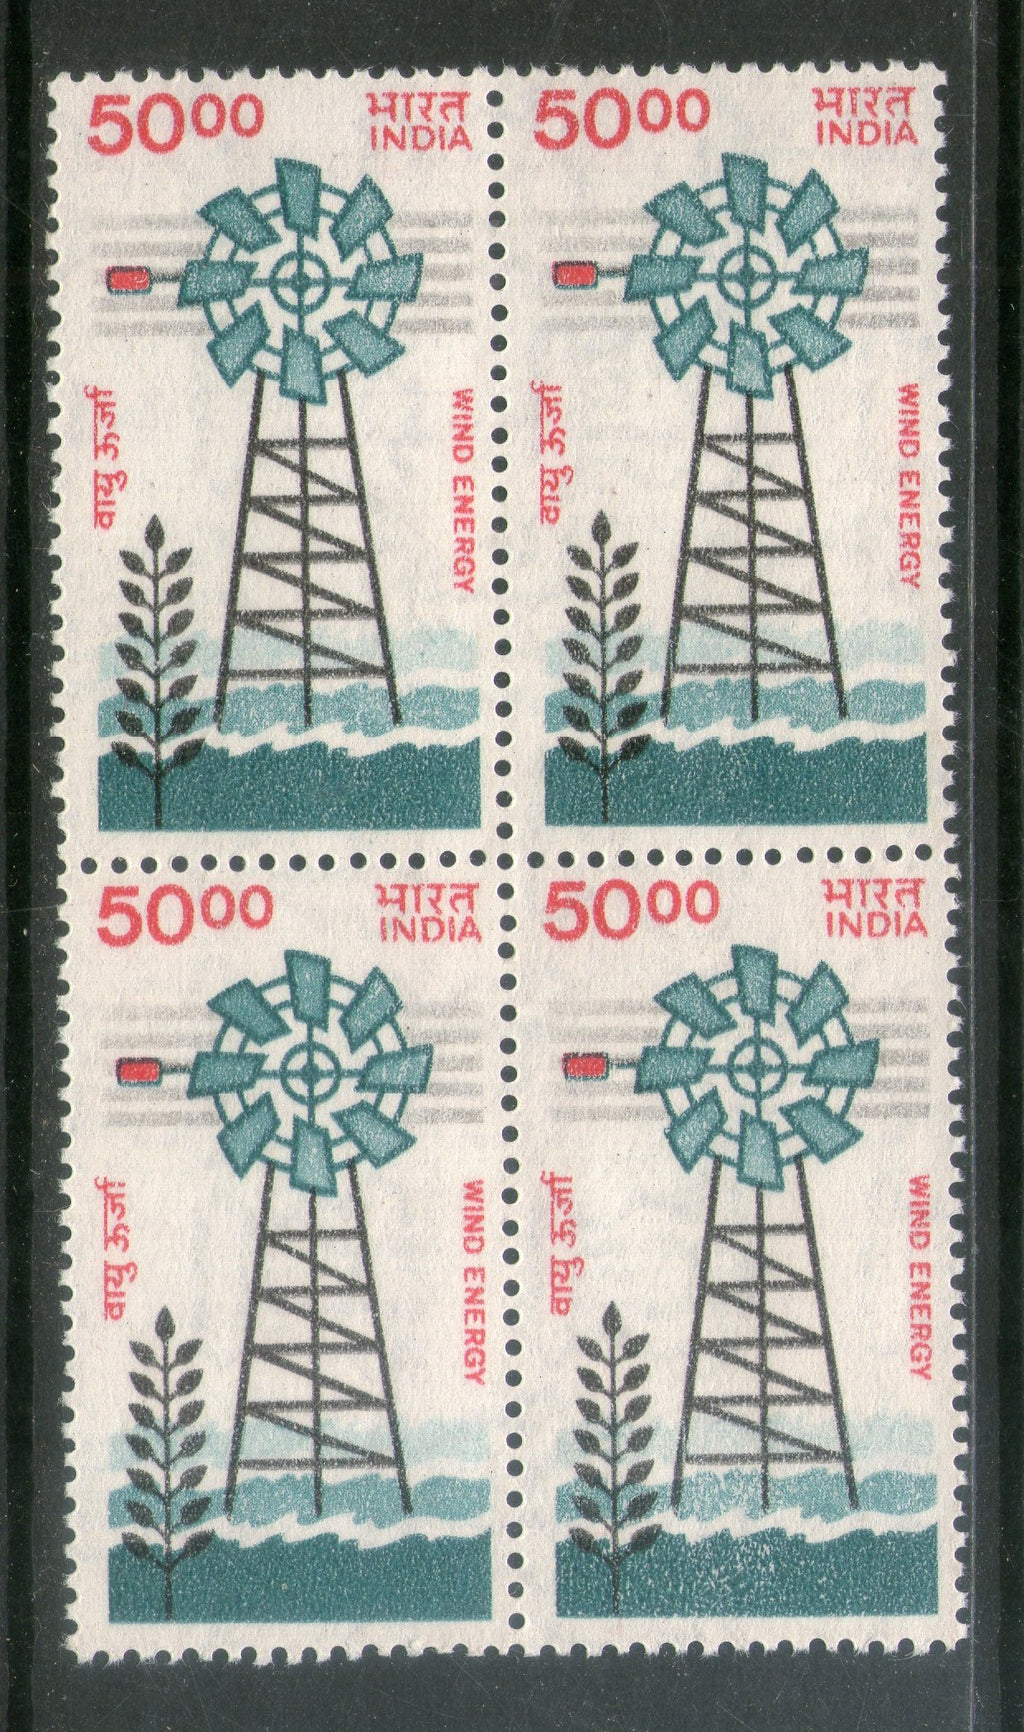 India 1986 Windmill 50 Rs. 7th Def. Series WMK-Up Right Phila-D152 BLK/4 MNH - Phil India Stamps